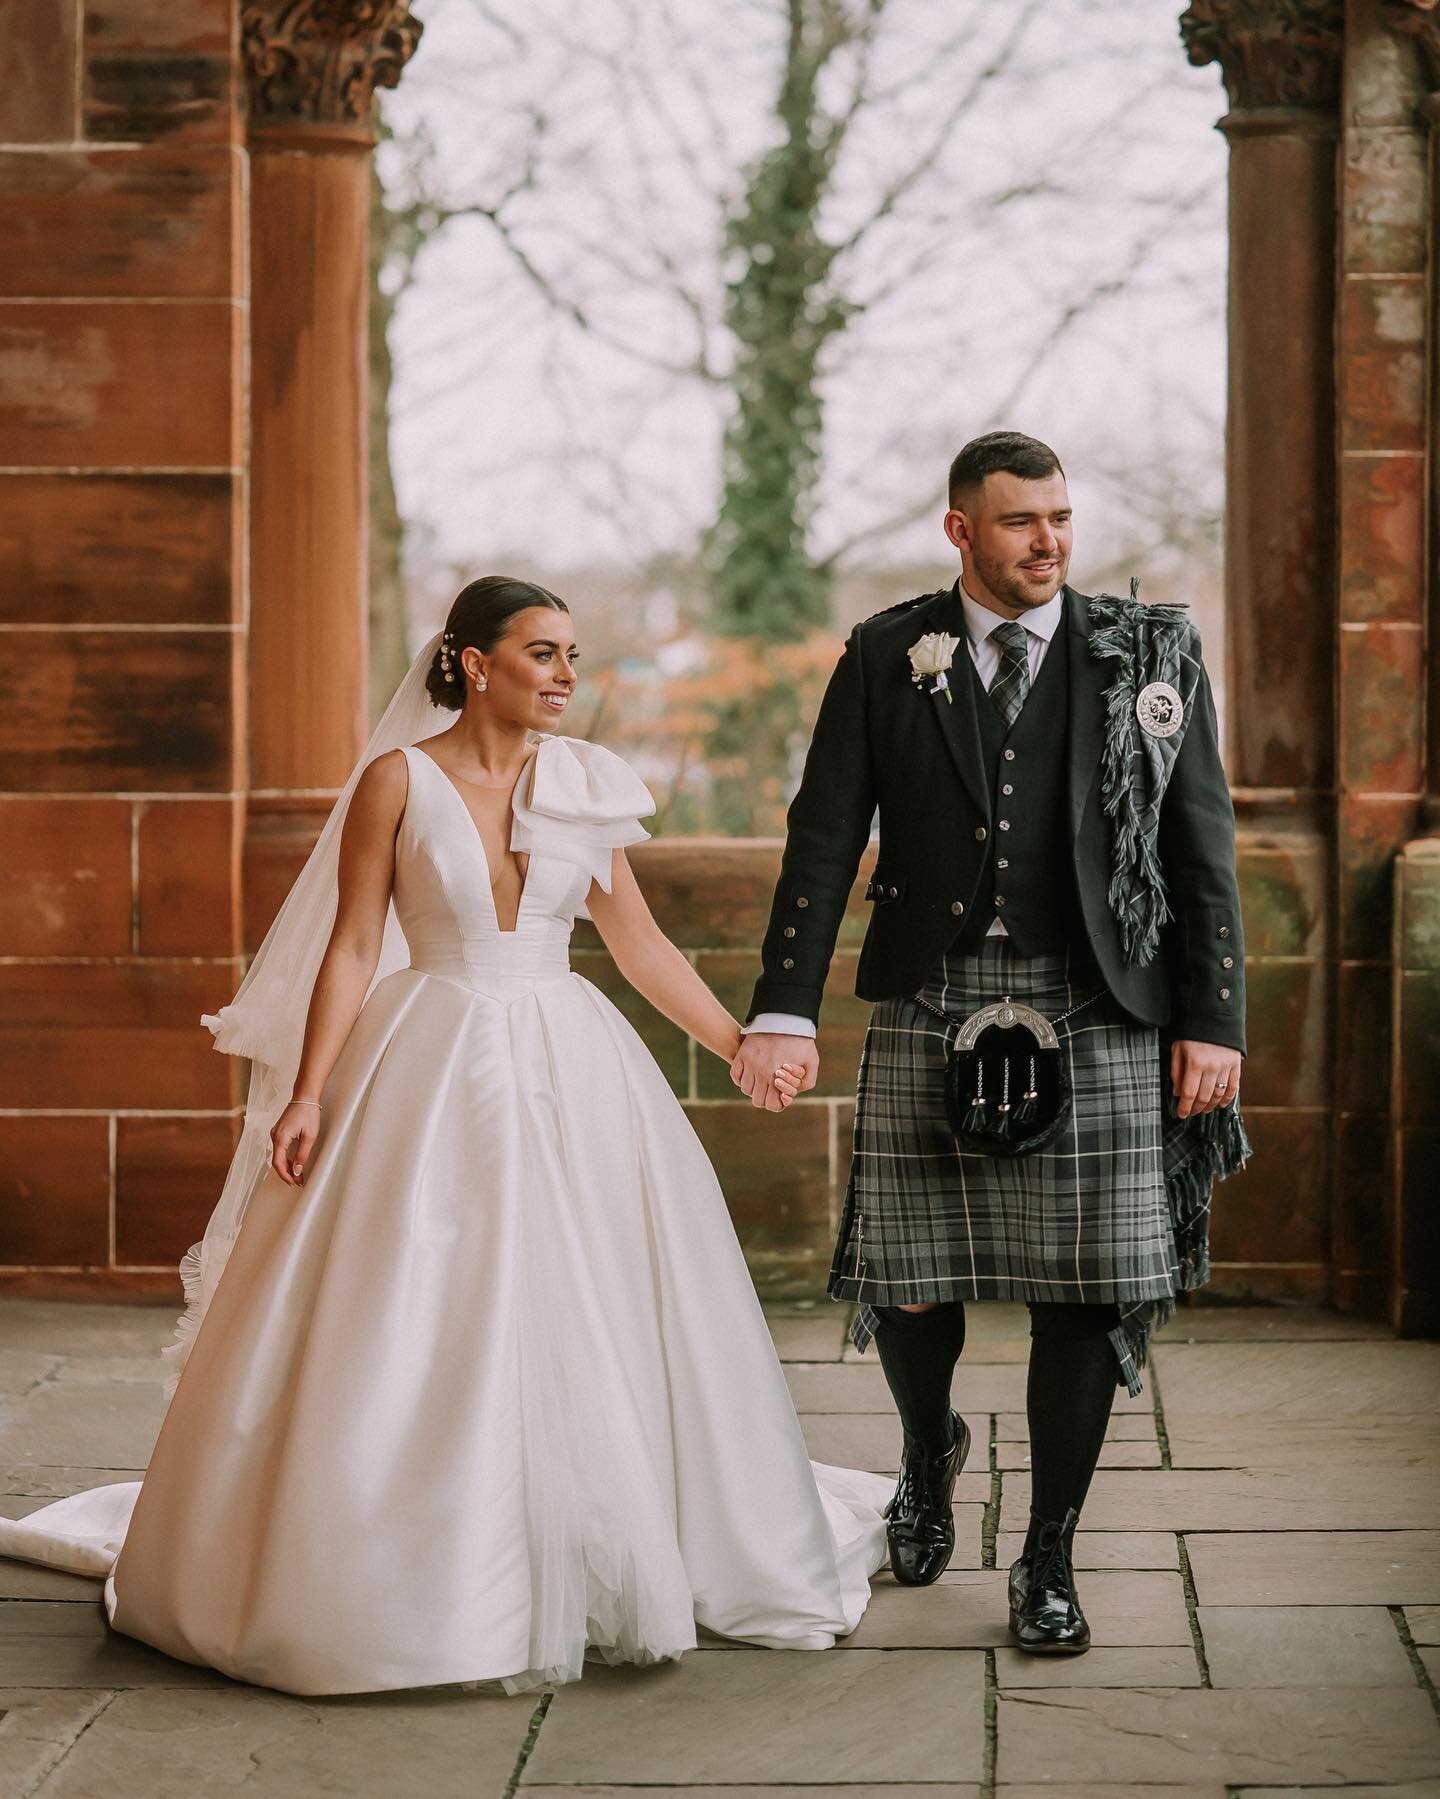 A few more previews from Eilidh &amp; Euan&rsquo;s day 💗
.
.
.
.
.
#nikon #wedding #letsgetmarried #boclair #boclairhouse #boclairhousehotel #boclairhousewedding #boclairwedding #ayrshirewedding #scottishwedding #glasgowwedding #ayrshireweddingphoto